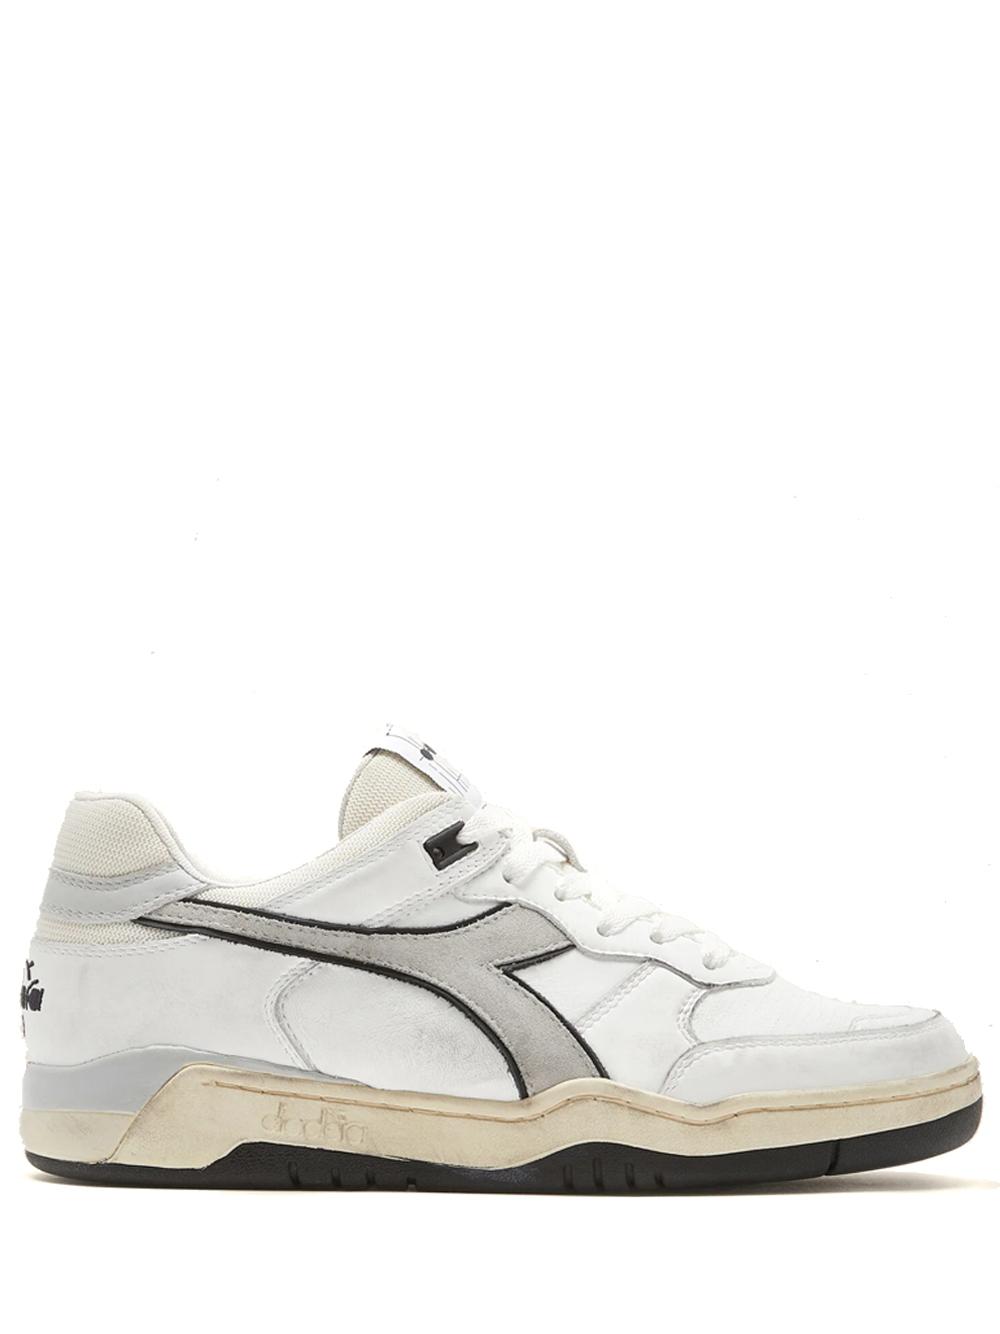 Diadora B560 Sneakers White In Leather for Men | Lyst